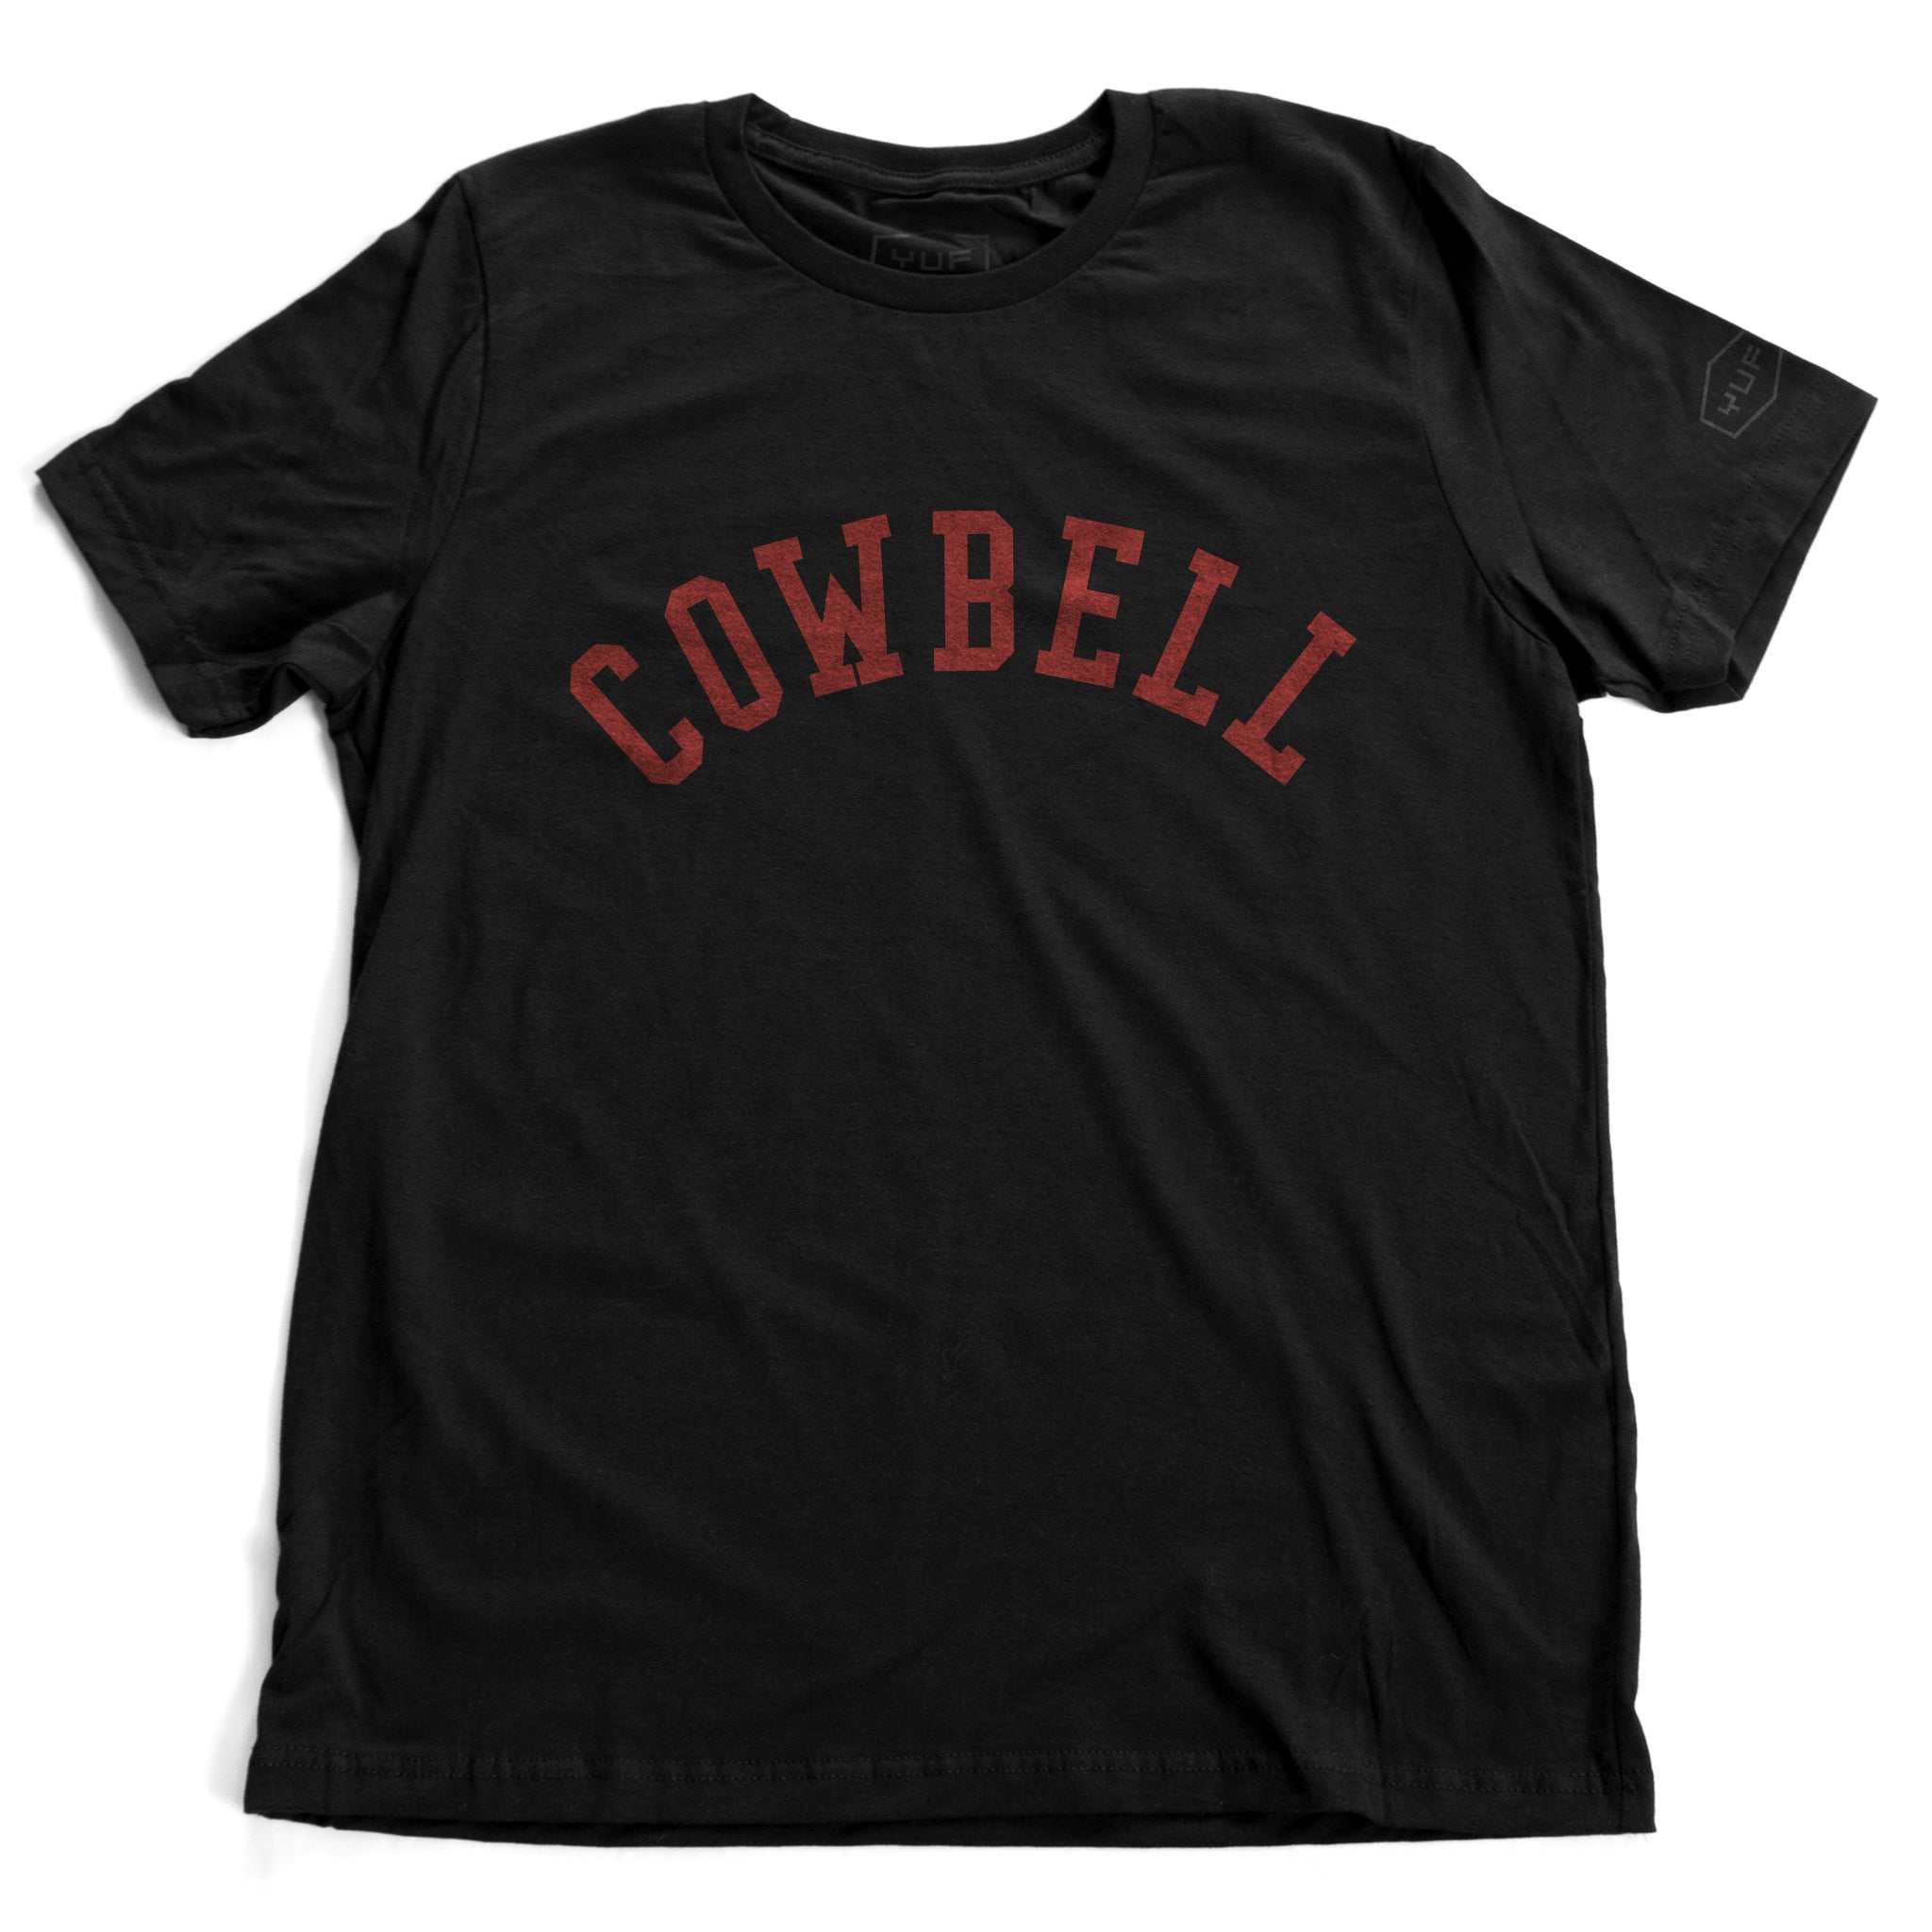 A classic black, retro, college-style t-shirt inspired by the classic Saturday Night Live comedy skit featuring Will Ferrell and Christopher Walken, “I got a fever and the only cure is more Cowbell.” This COWBELL tee is like a Cornell University t-shirt. From fashion brand YUF, available on wolfsaint.net